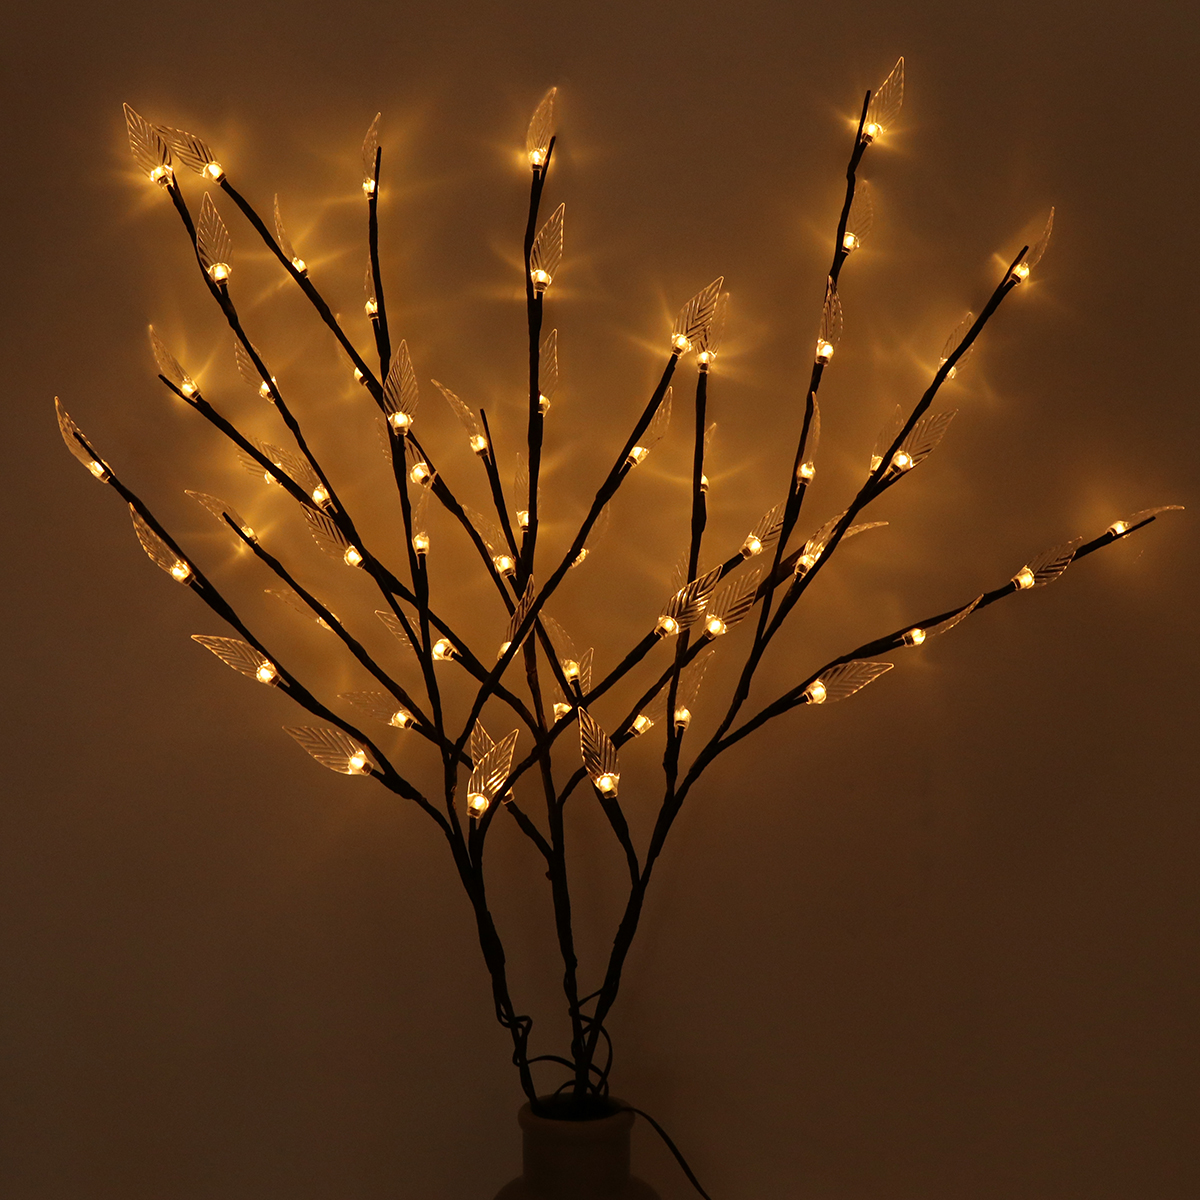 3PCS-LED-Solar-Powered-Lawn-Light-Tree-Branches-Ground-Lamp-Outdoor-Garden-Yard-Lighting-Decoration-1735081-9